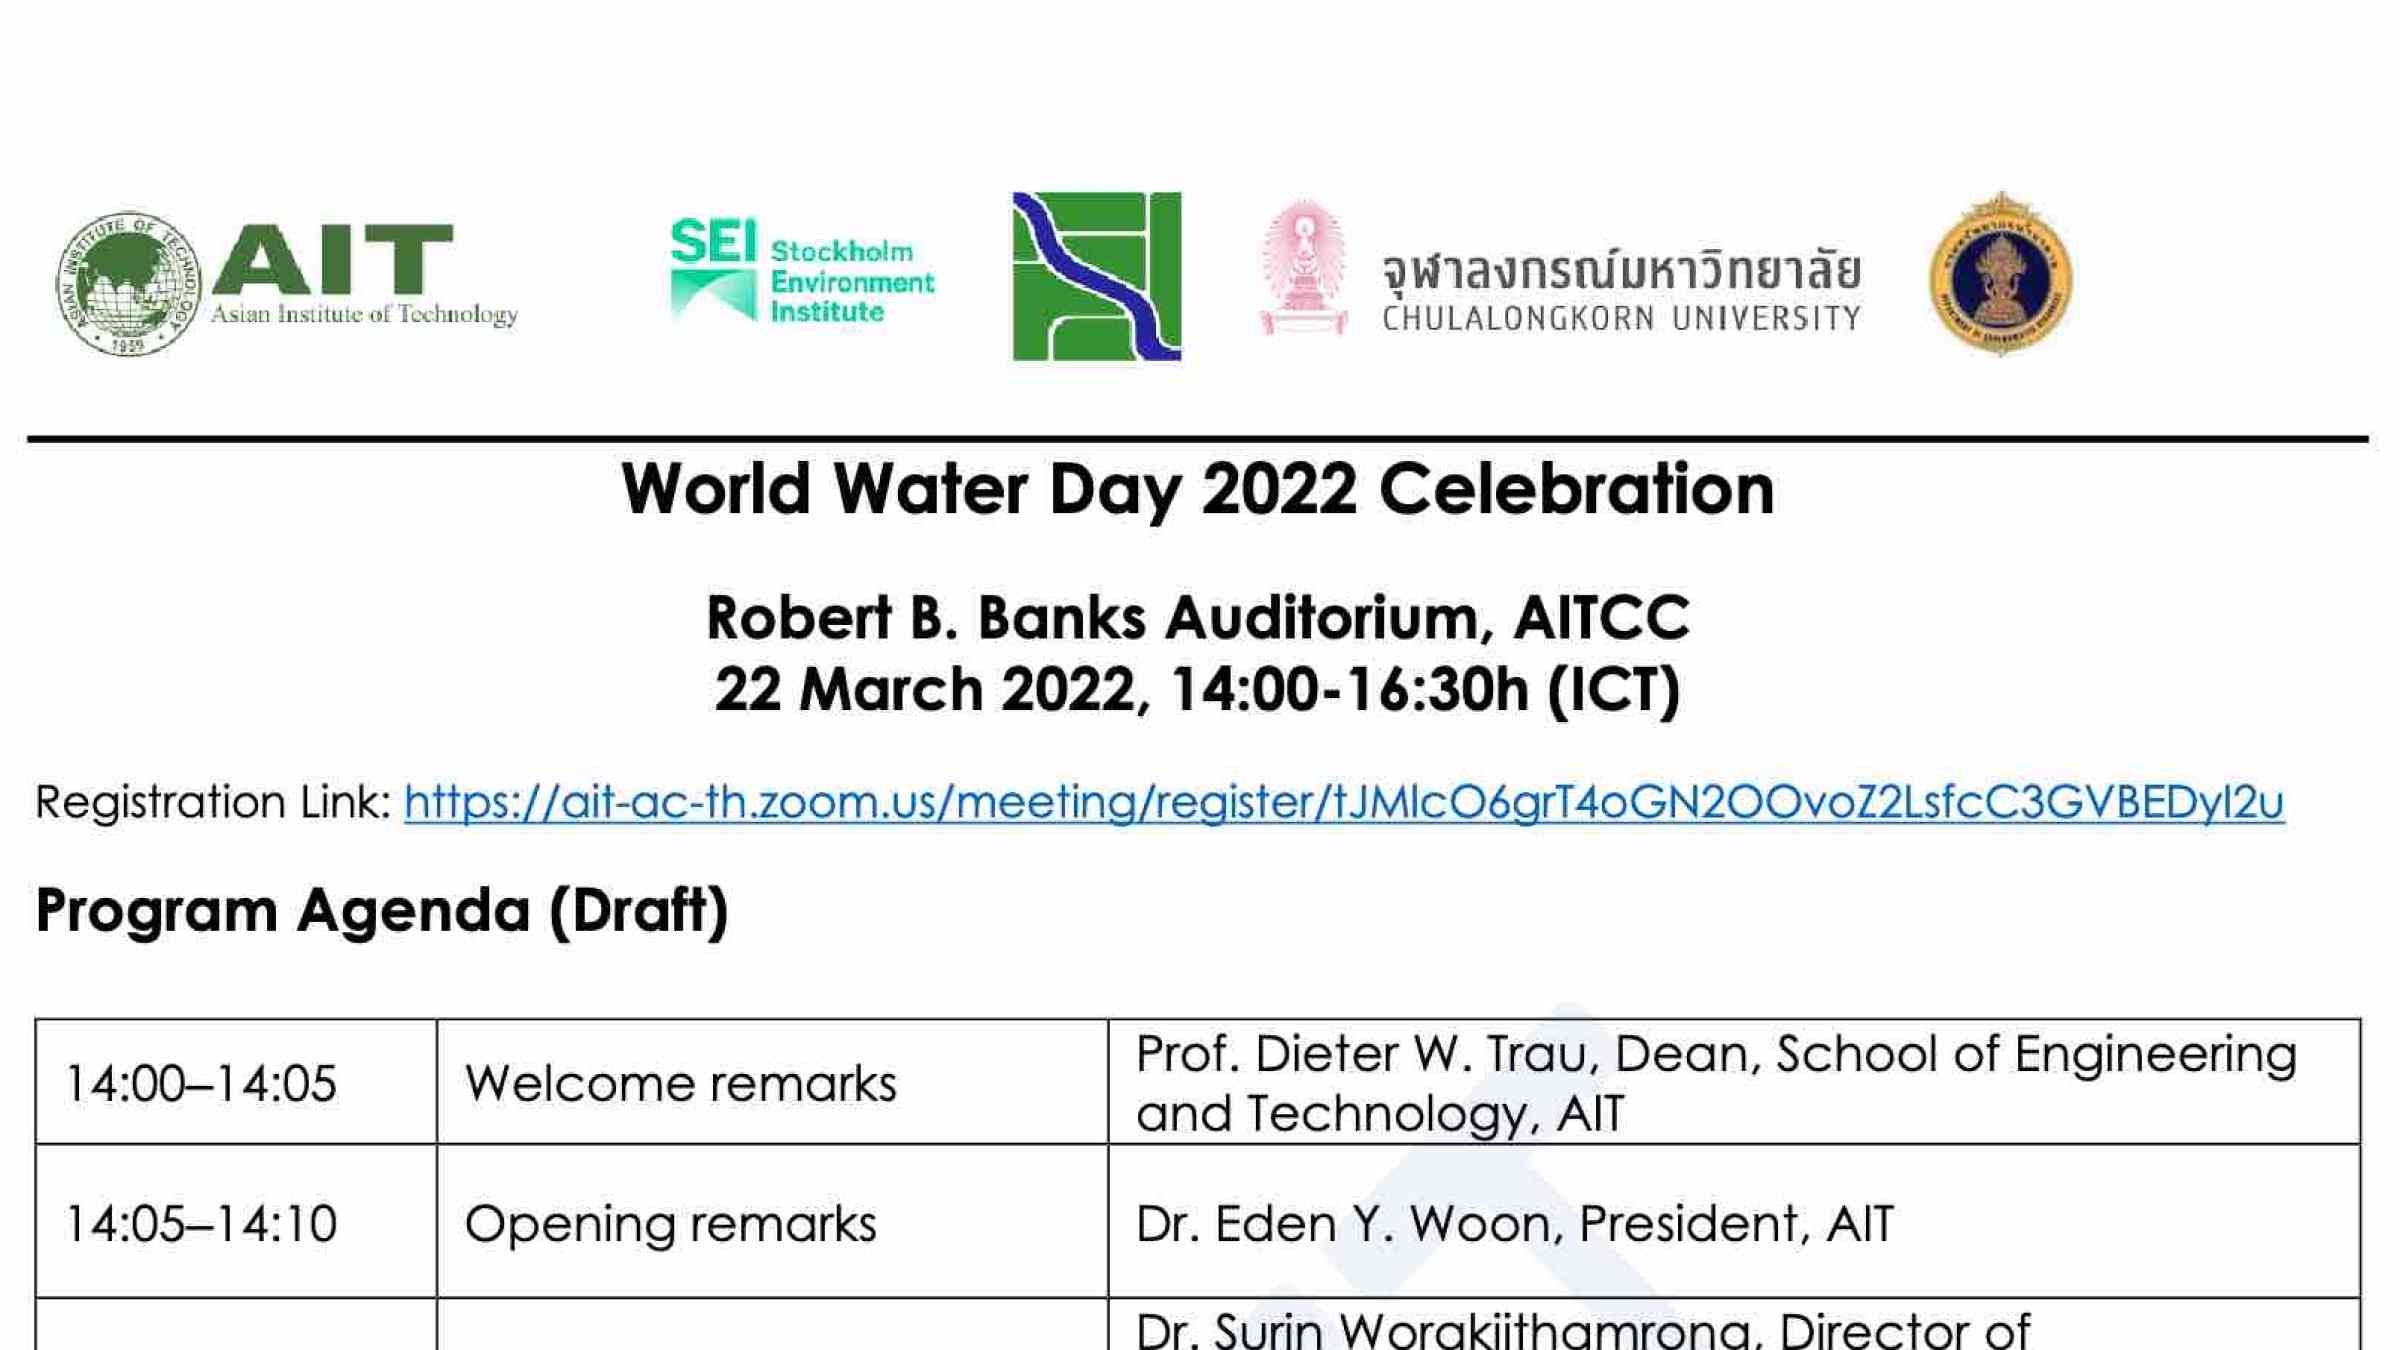 Programme of the World Water Day 2022 celebration